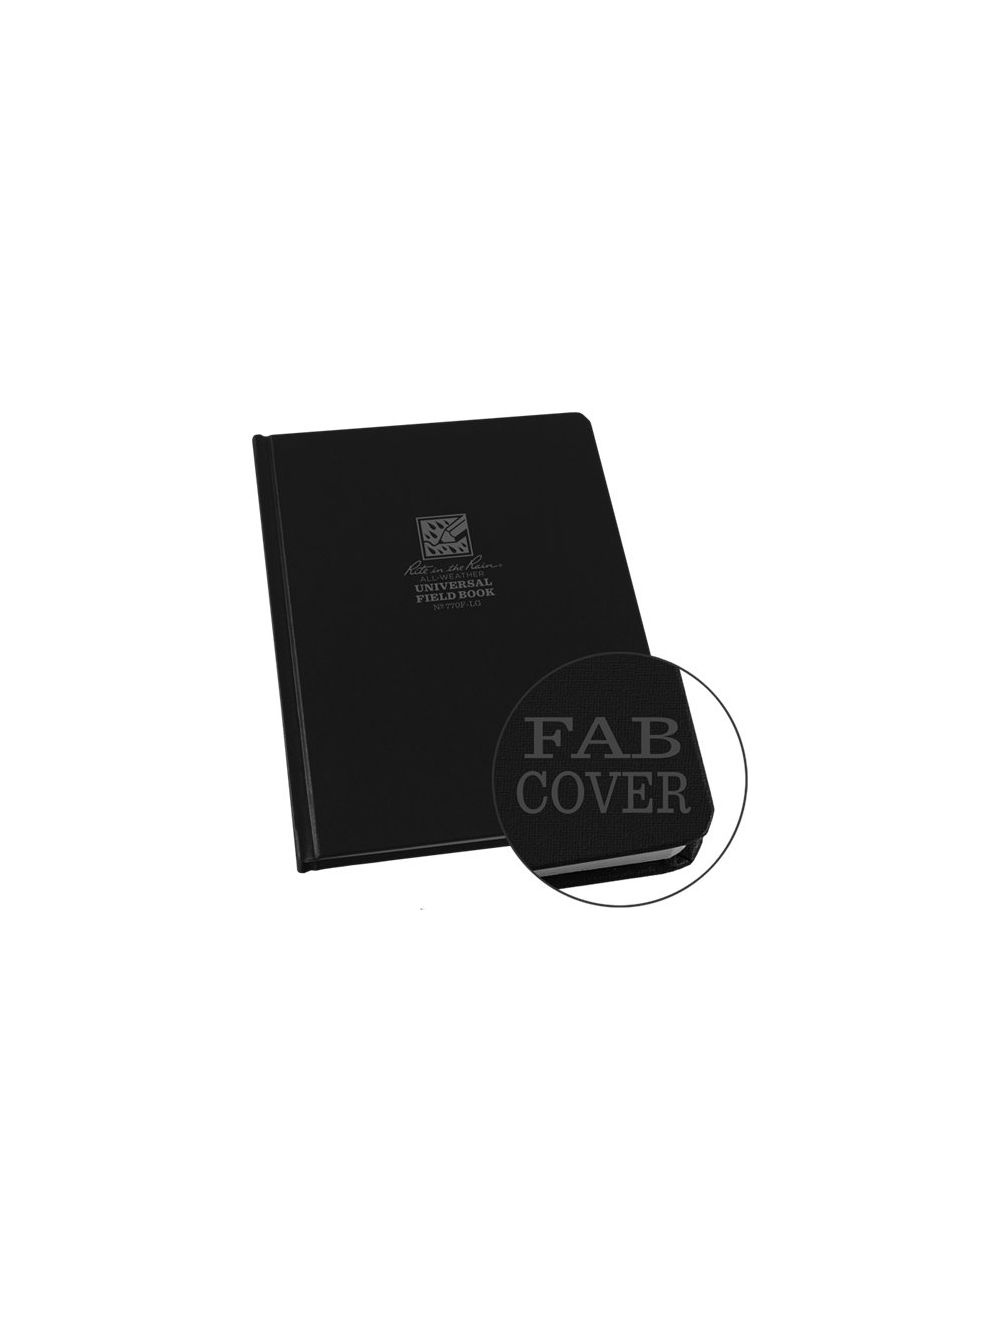 Hard-Cover Notebook (6.75'' x 8.75'')